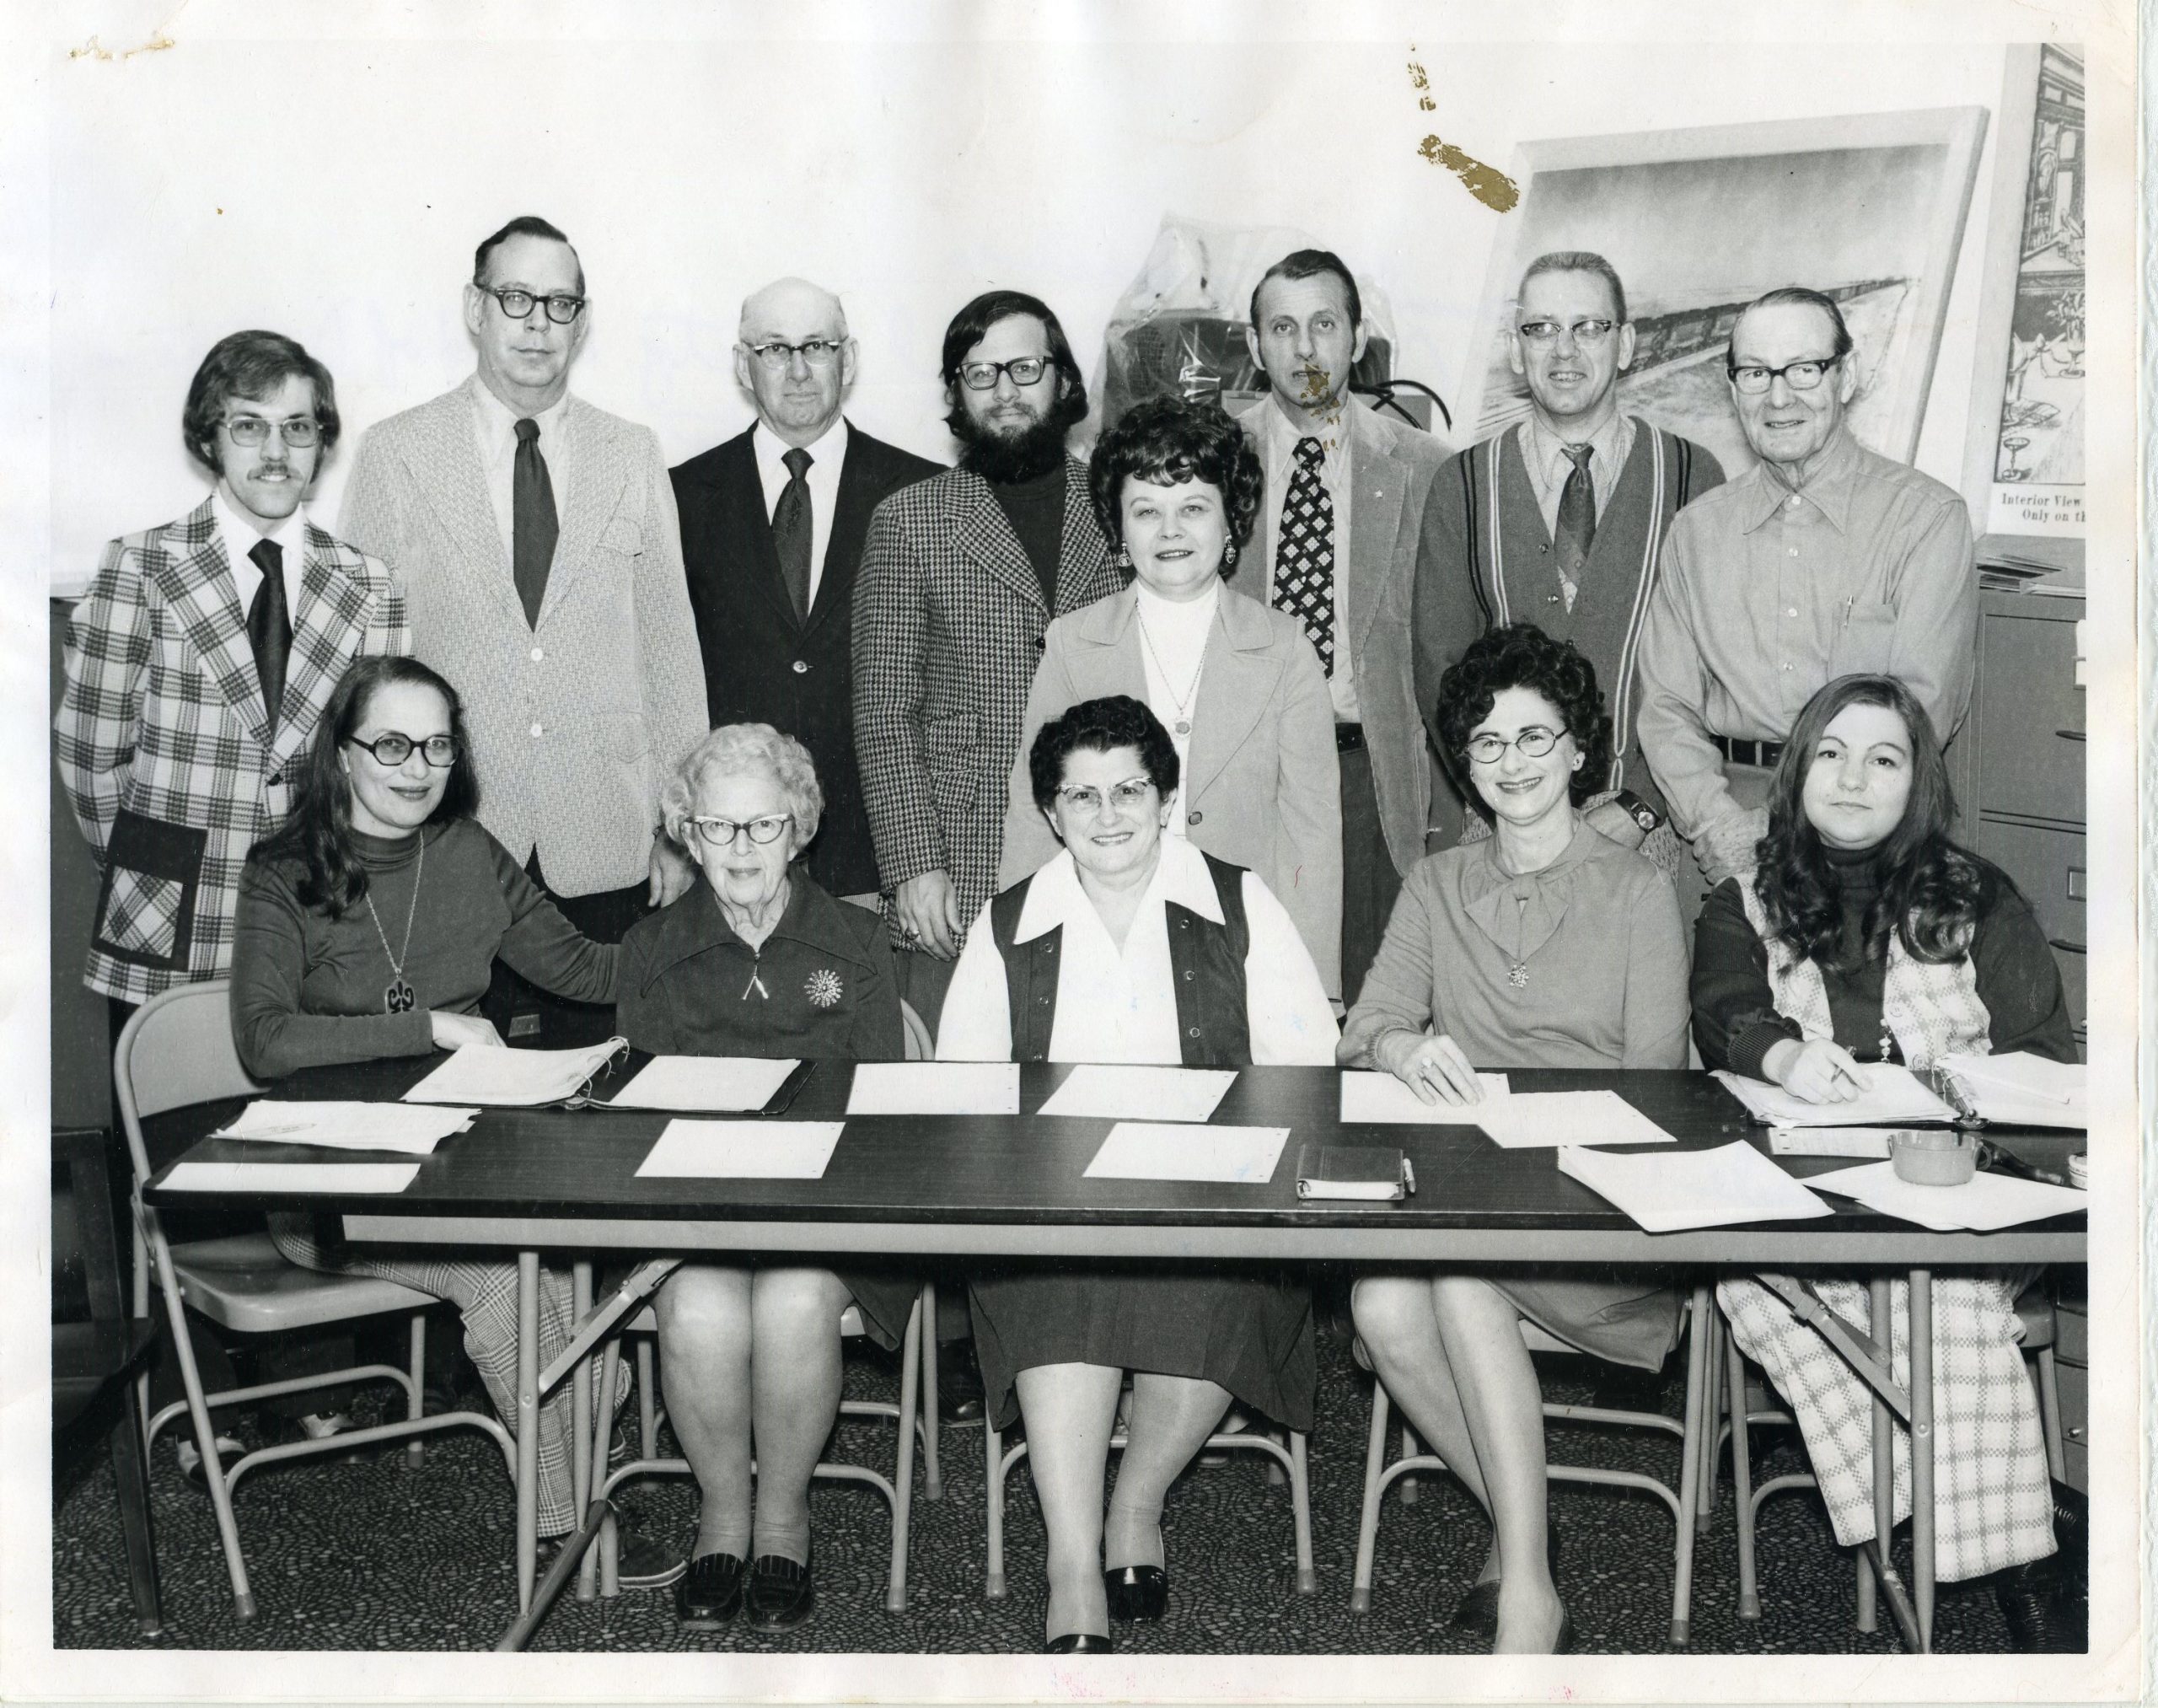 Adams County Historical Society Board of Directors, January 16, 1975. Dorothy pictured front left. Courtesy of Adams County Historical Society.